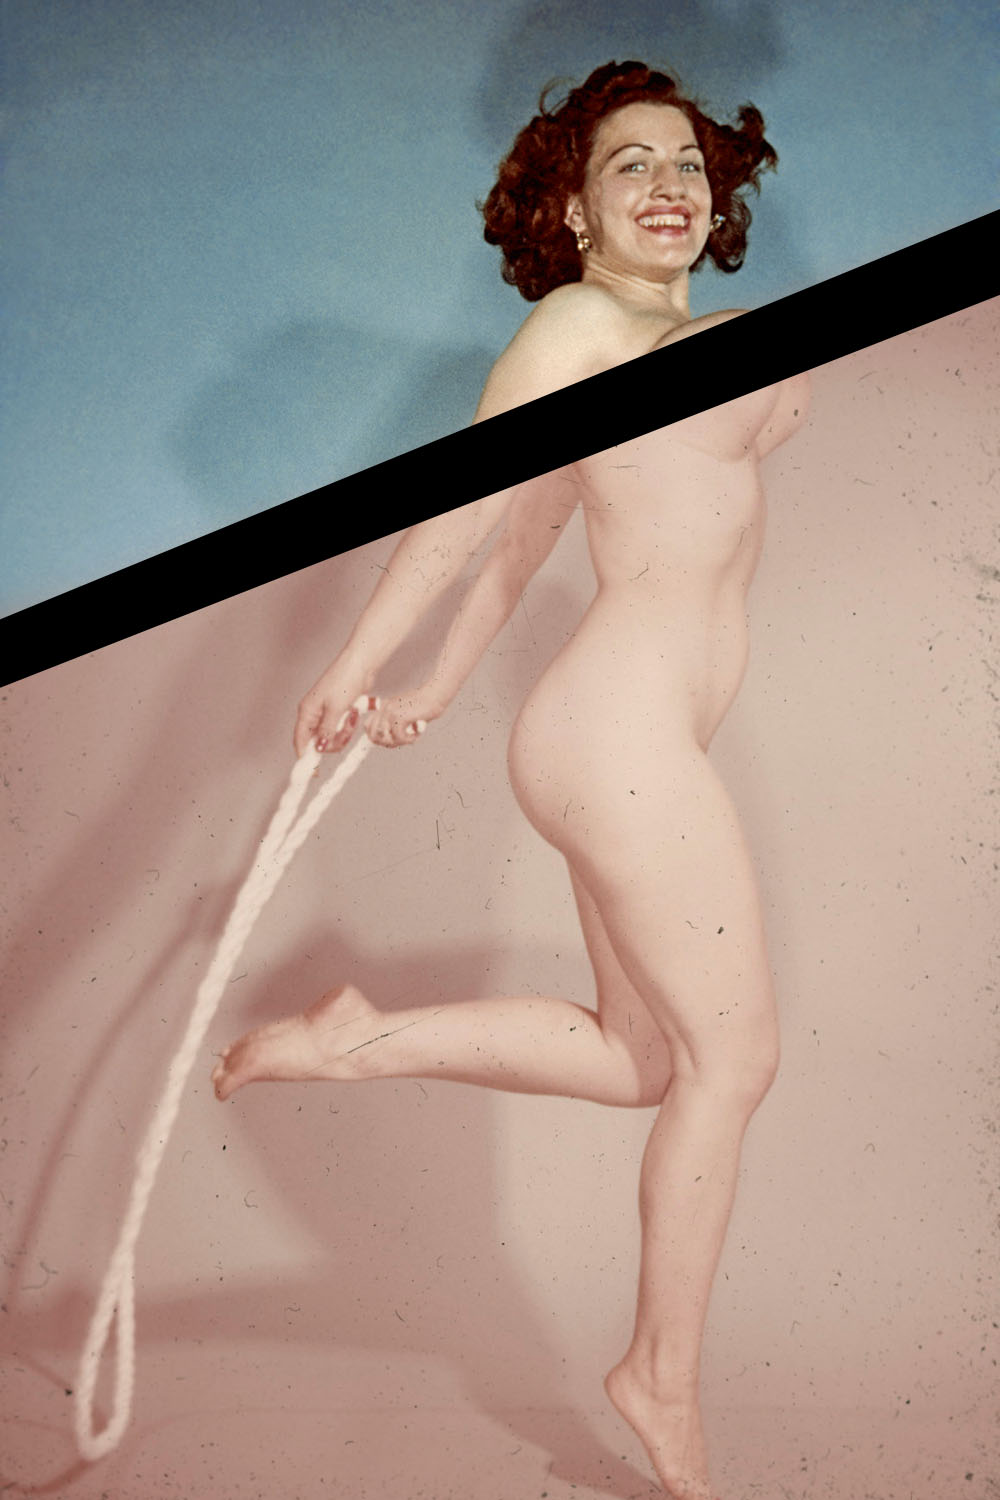 Nude Women of the 1950s - Restoring Pinups, Not Pornography